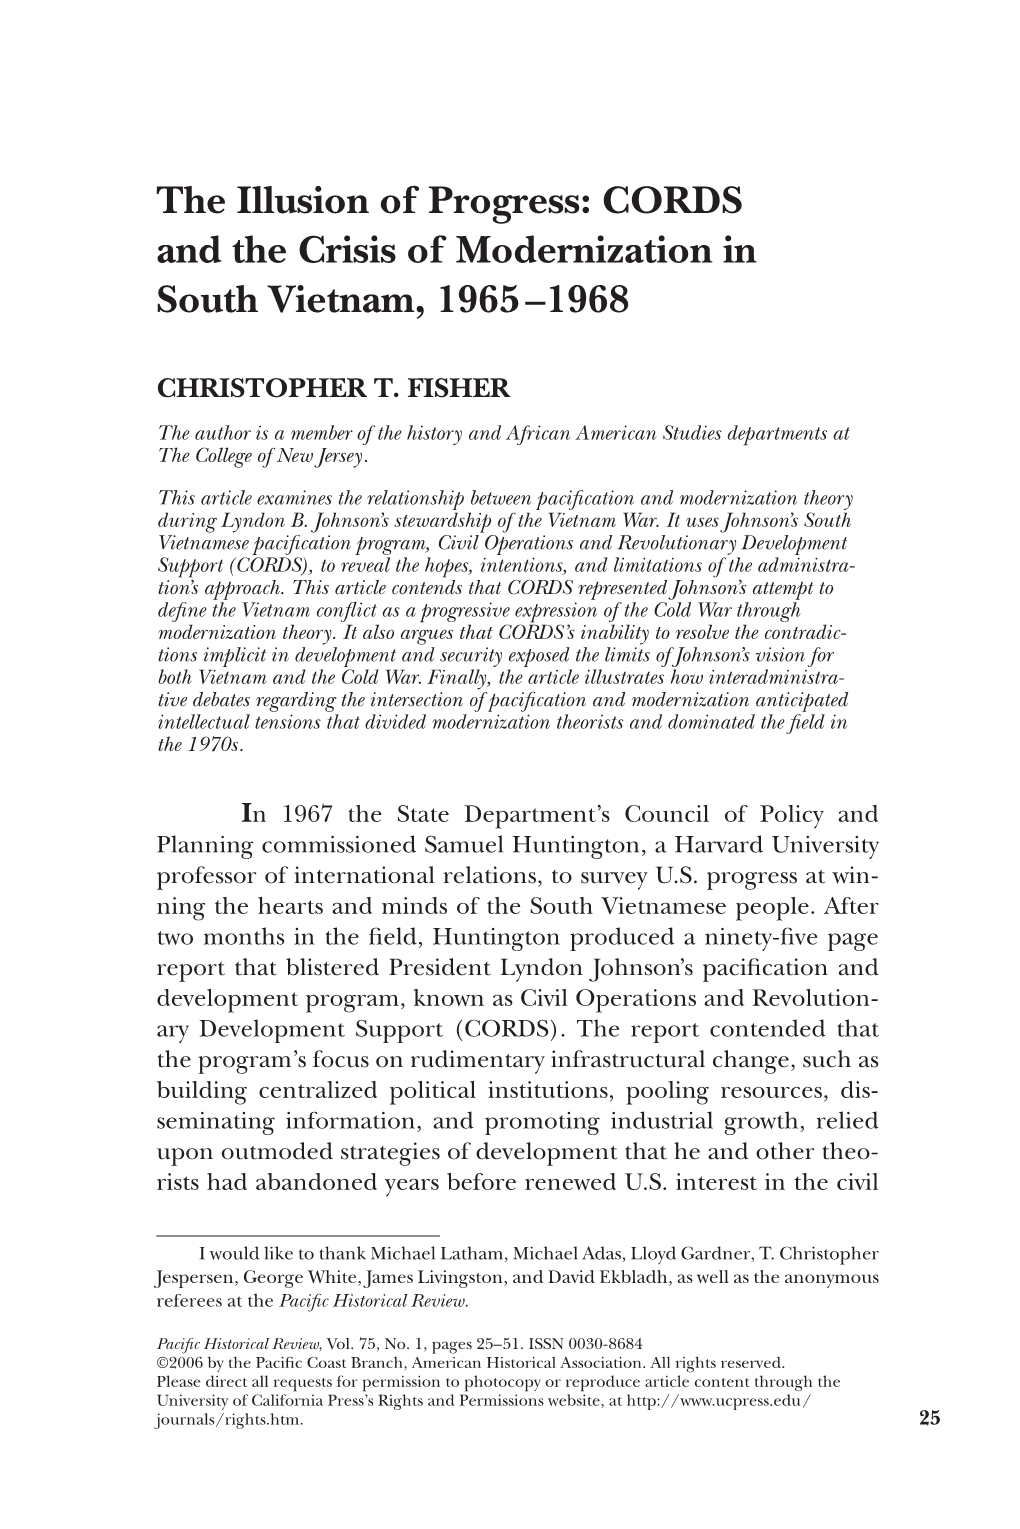 The Illusion of Progress: CORDS and the Crisis of Modernization in South Vietnam, 1965 –1968